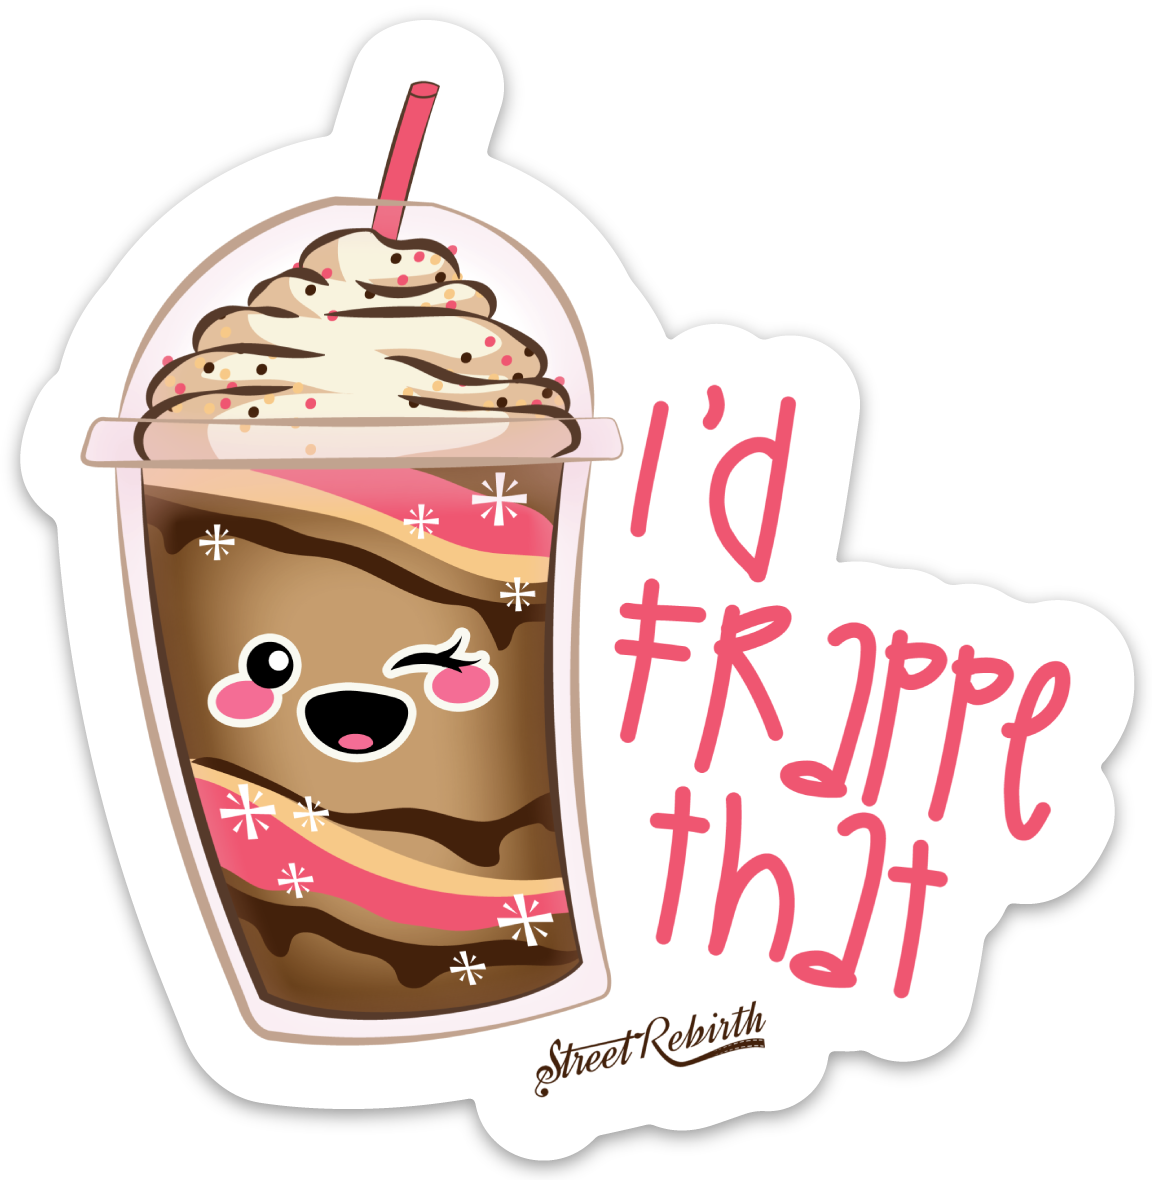 I'D FRAPPE THAT PUN STICKER – ONE 4 INCH WATER PROOF VINYL STICKER – FOR HYDRO FLASK, SKATEBOARD, LAPTOP, PLANNER, CAR, COLLECTING, GIFTING